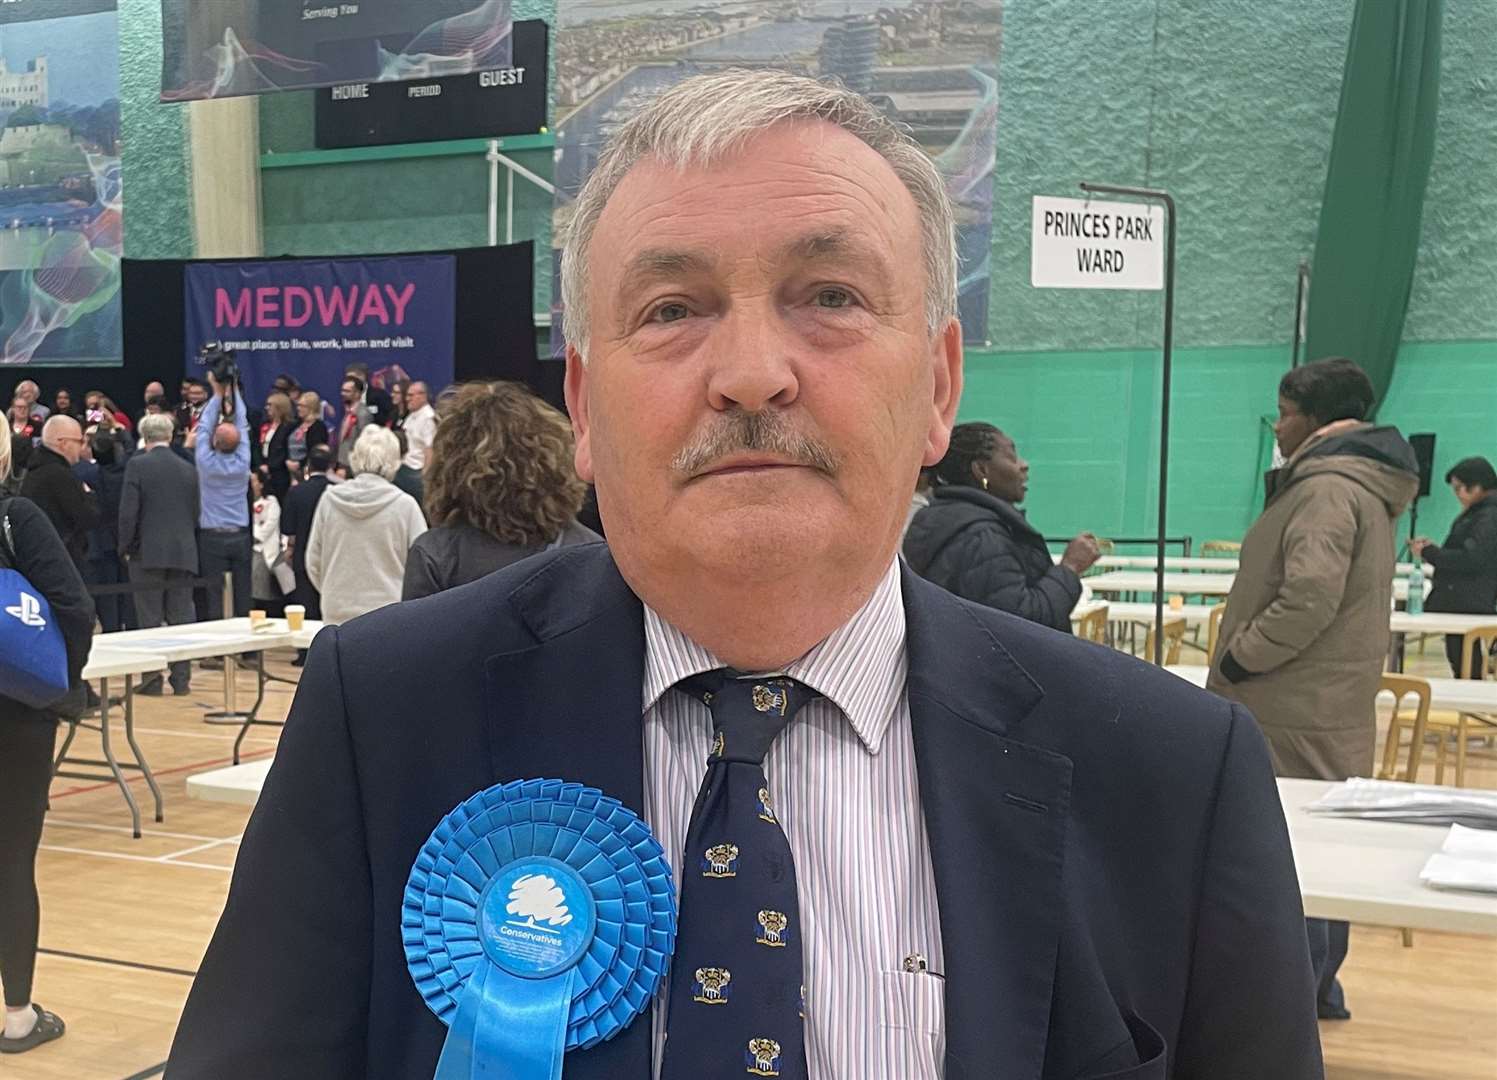 Exiting Conservative leader Alan Jarrett was disappointed after Labour took control of Medway Council